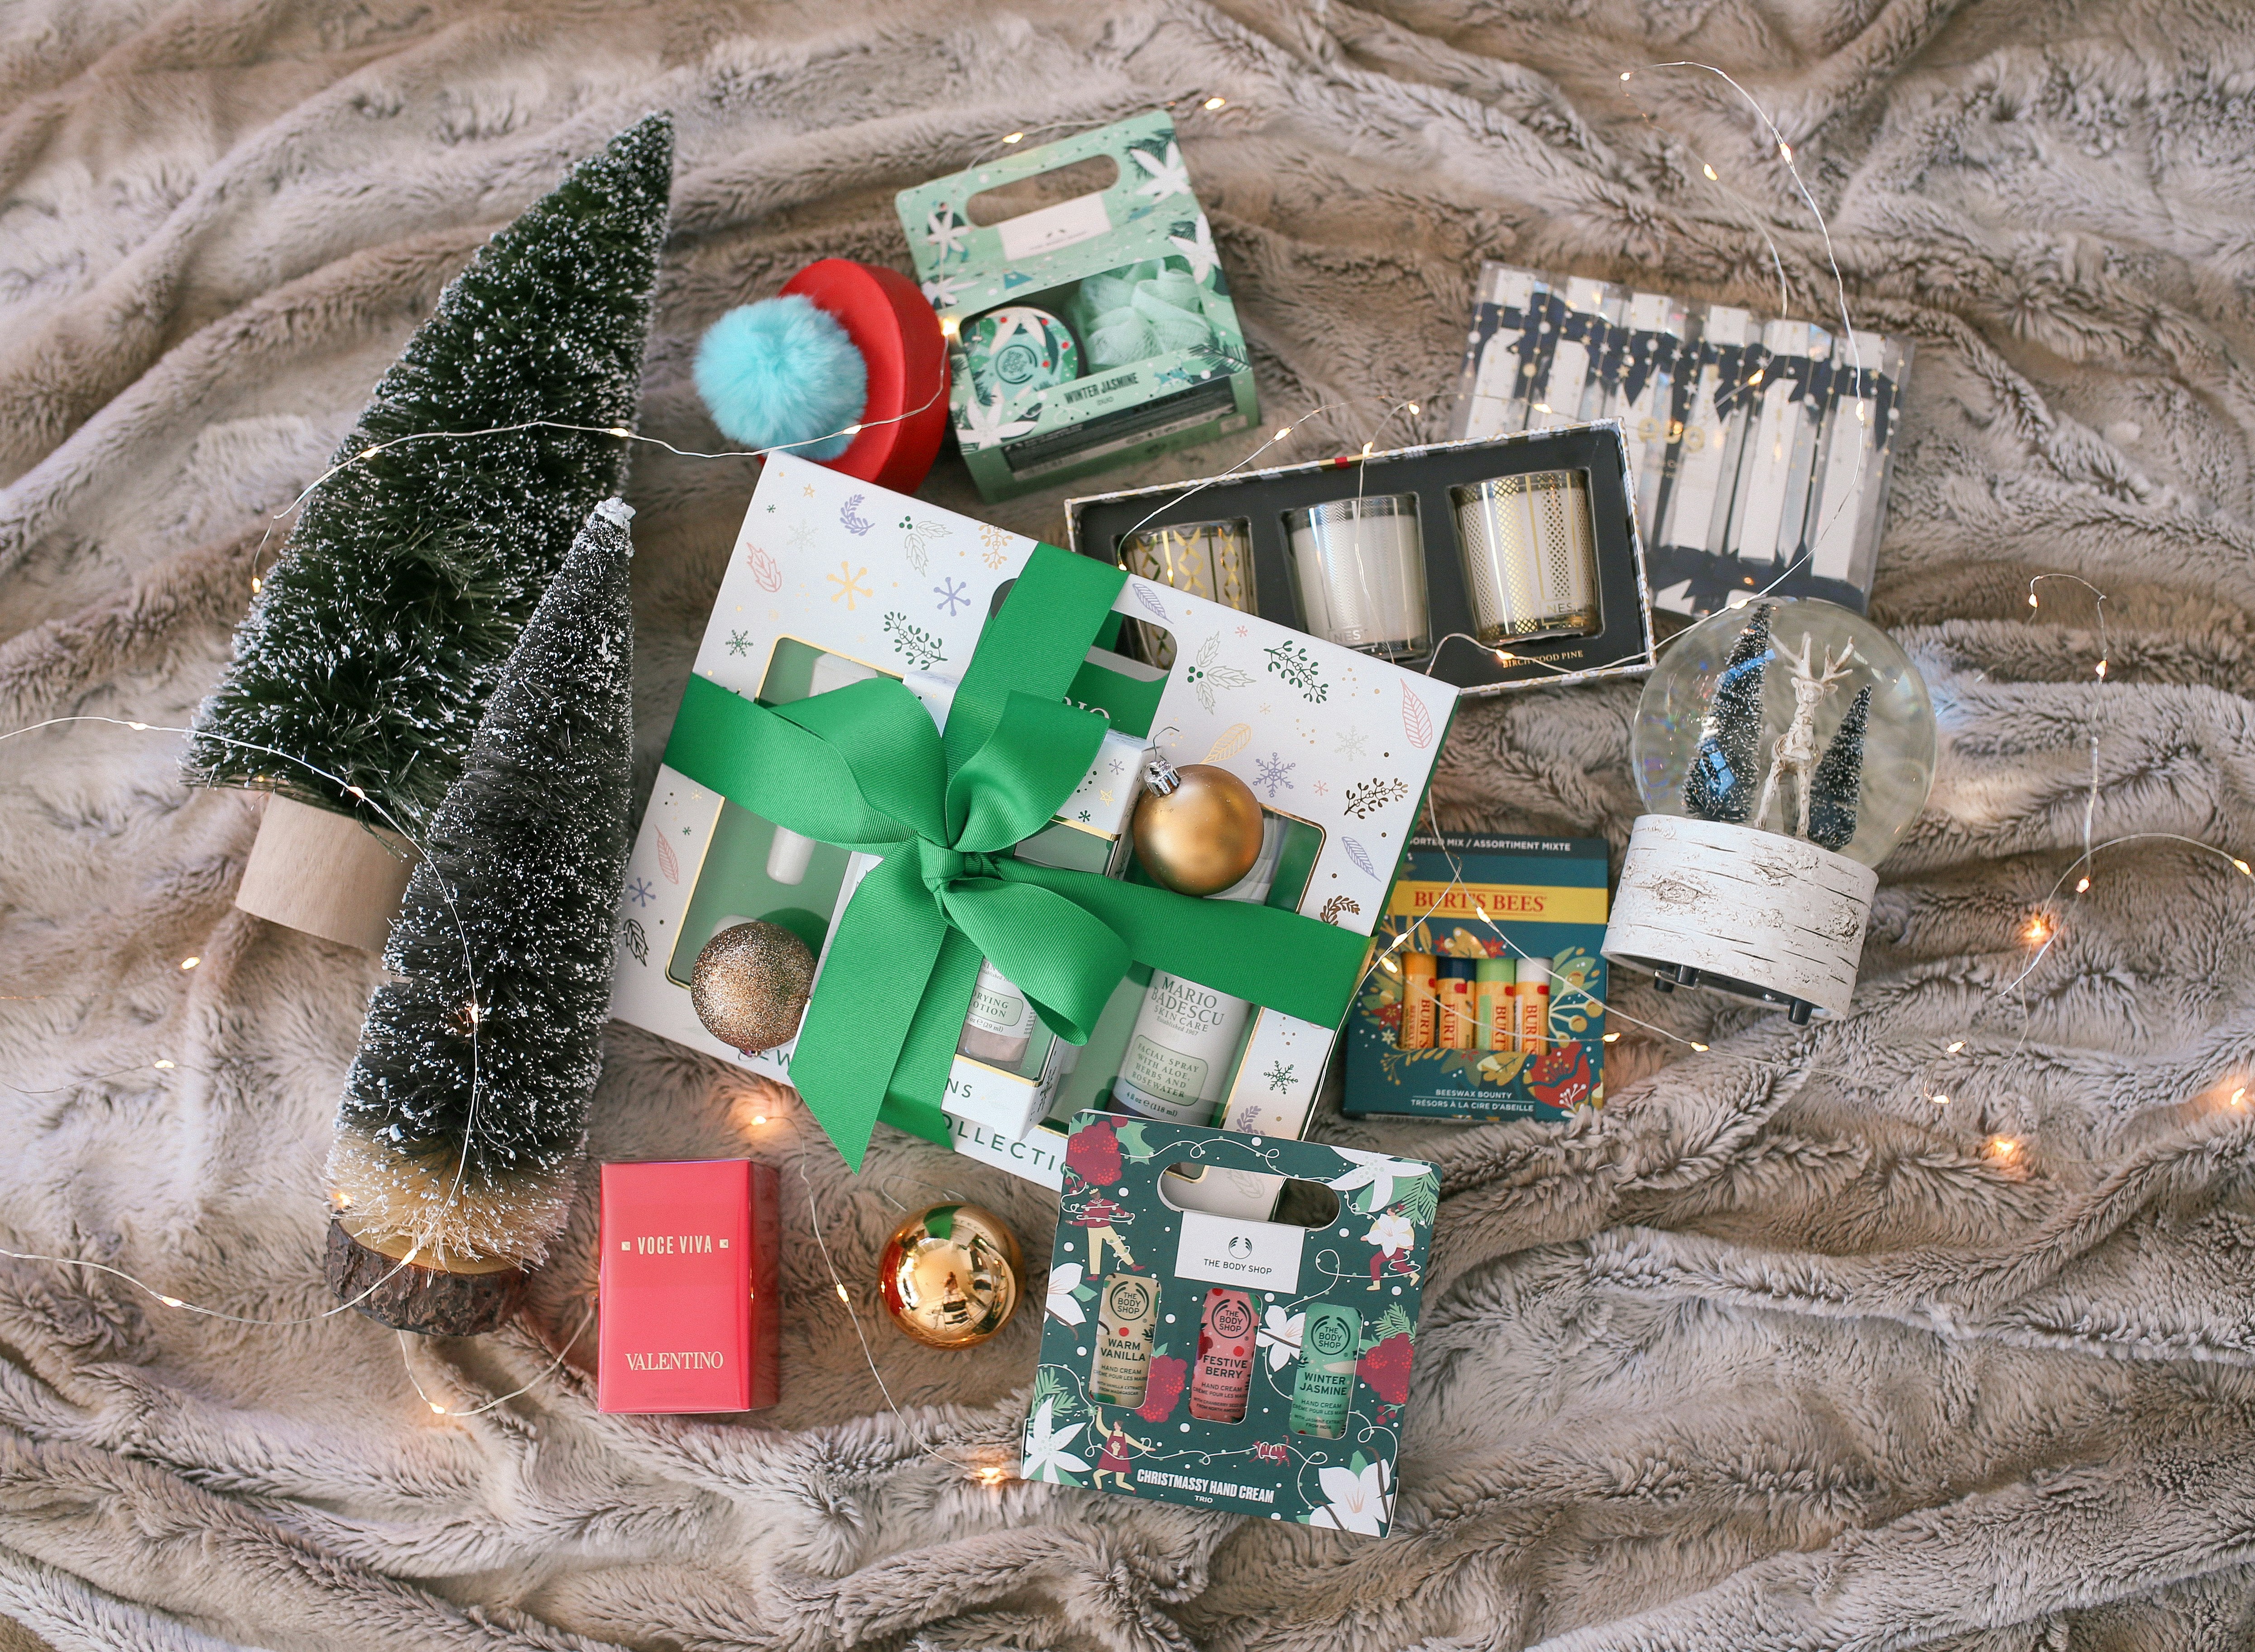 Christmas Beauty Gift Guide: The Best Beauty Gift Ideas for Christmas 2020: from gifts under $20 to cruelty-free beauty and Holiday candles.